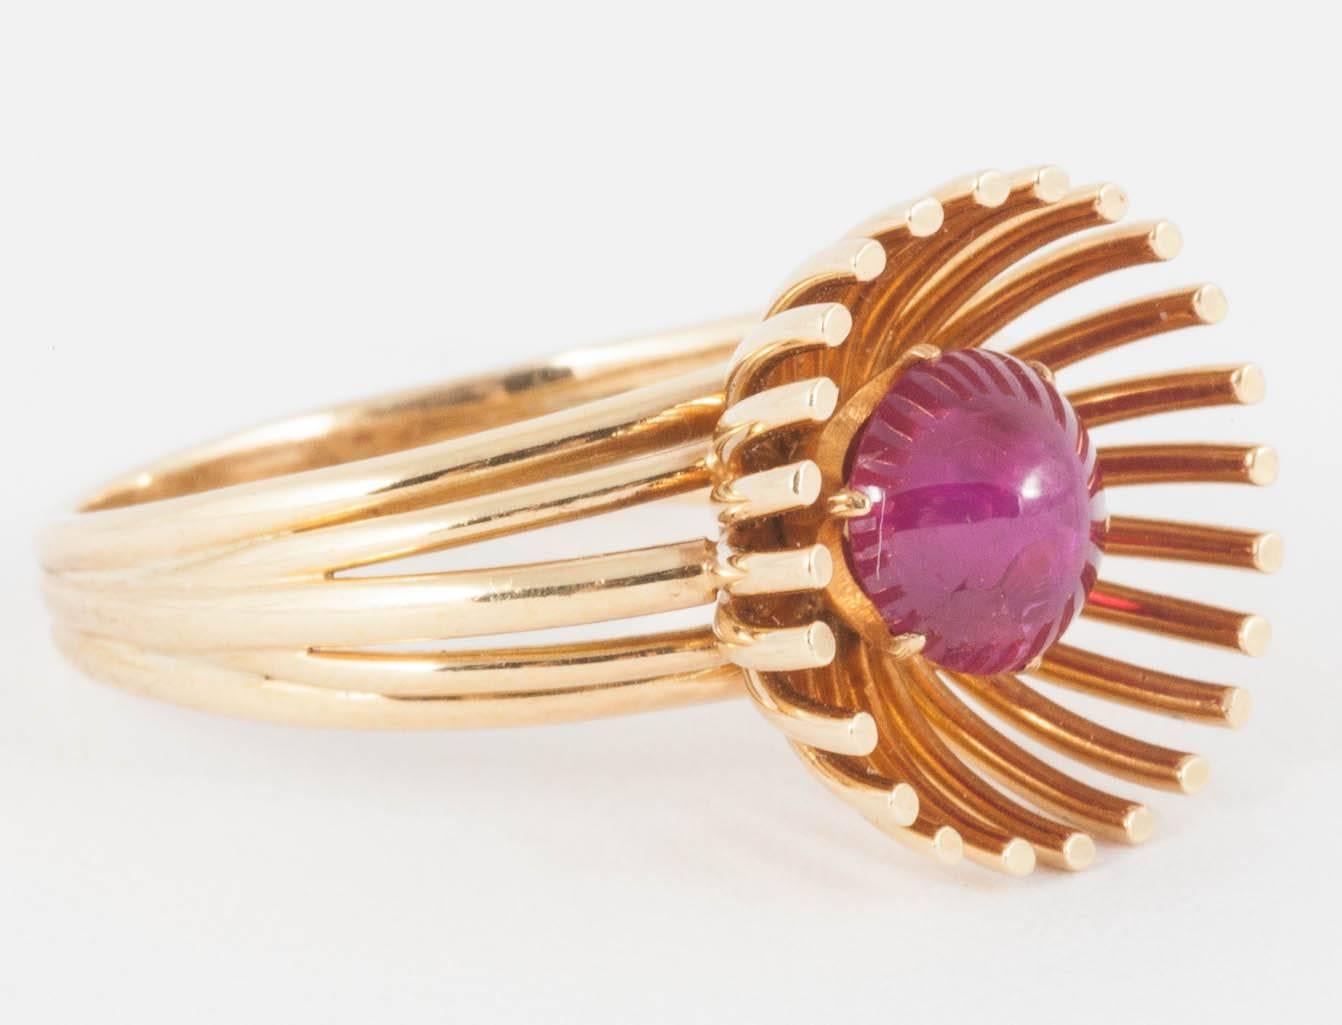 An unusual 18ct yellow gold ring of wirework design,with a cabochon cut burma ruby centre stone protected by its petalled surround,hallmarked london 1954 and signed Hans Mautner